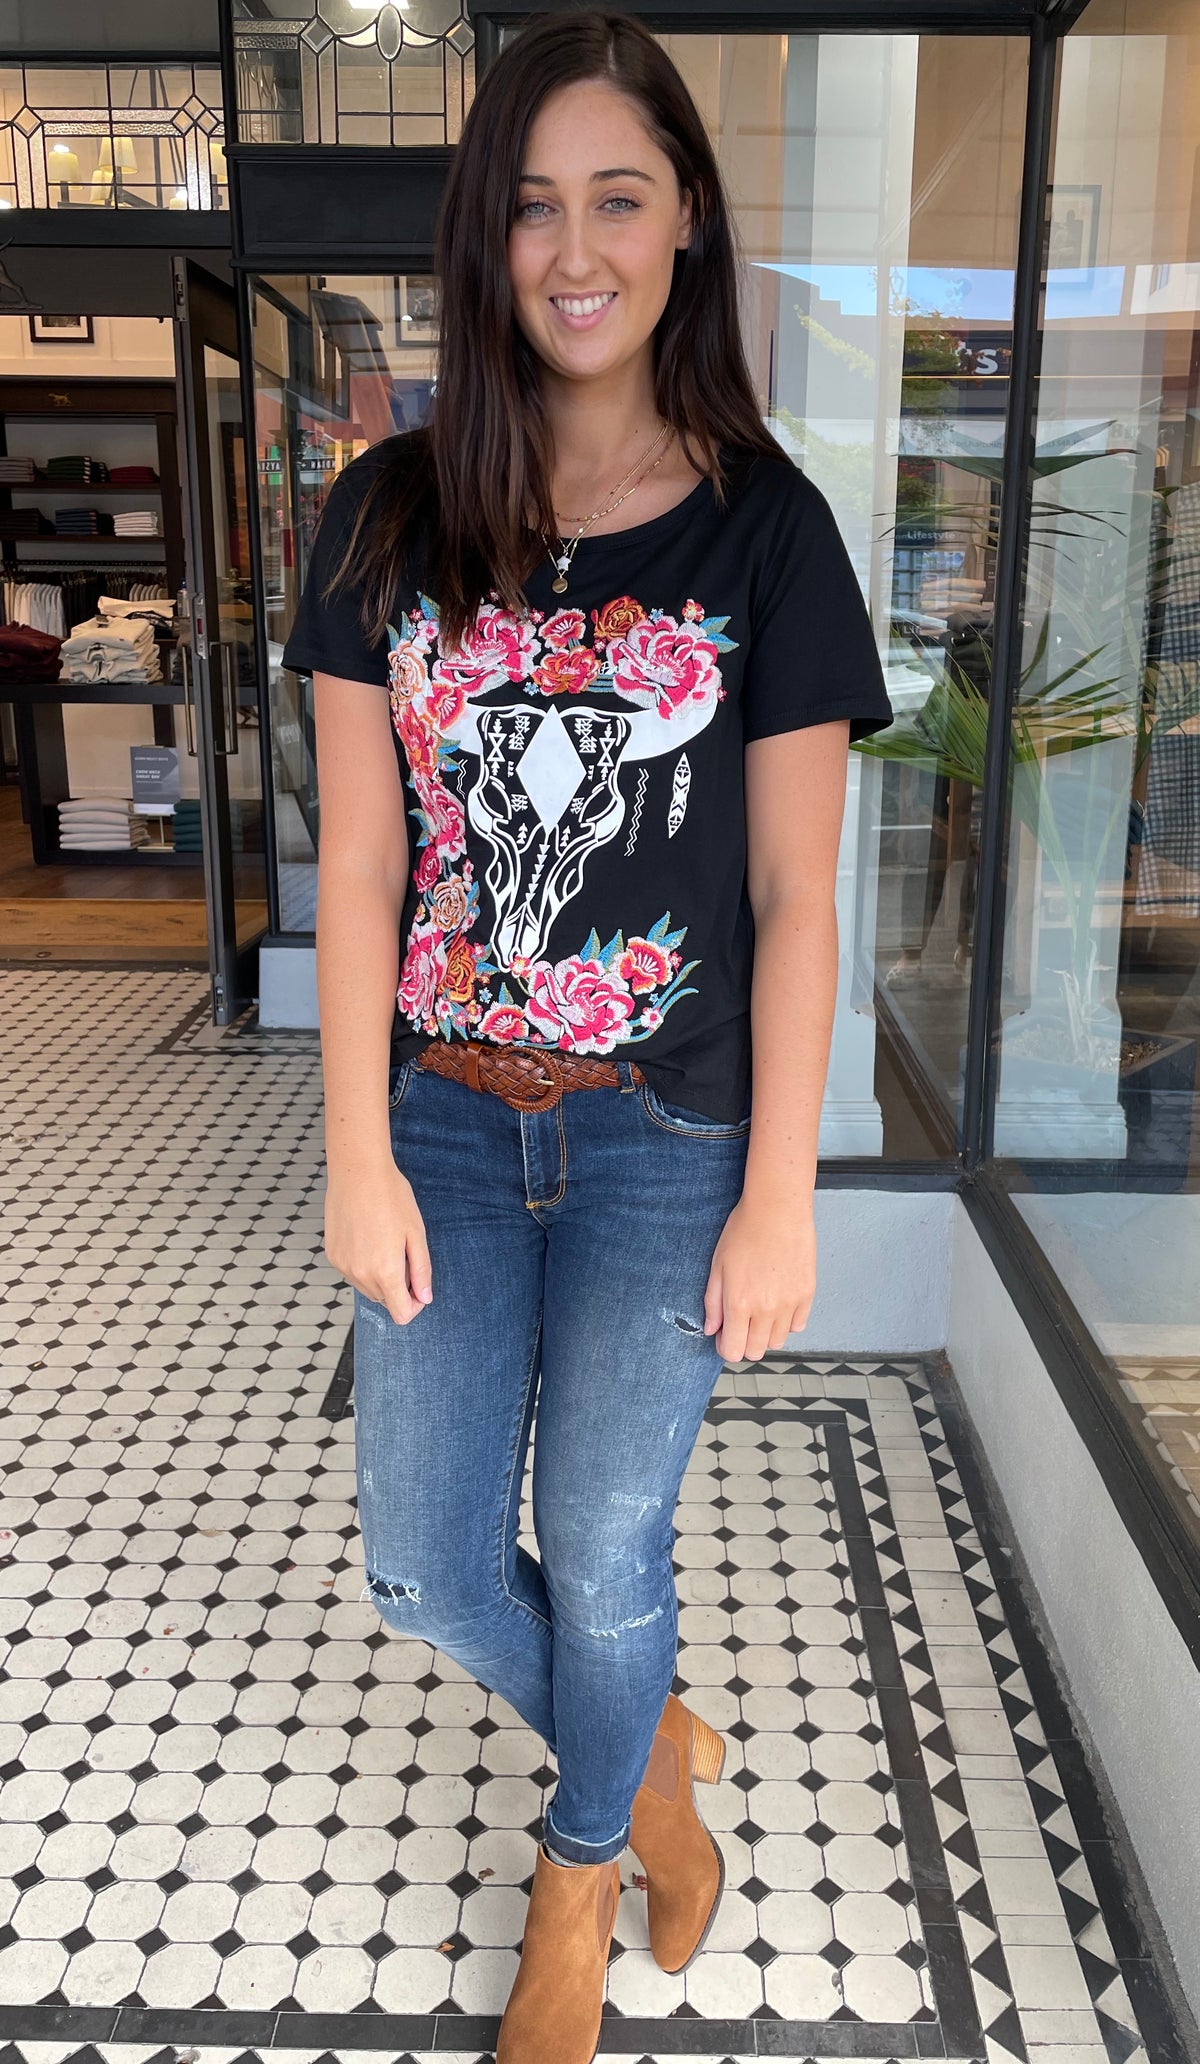 Bulls and Roses Embroidered Tee Black